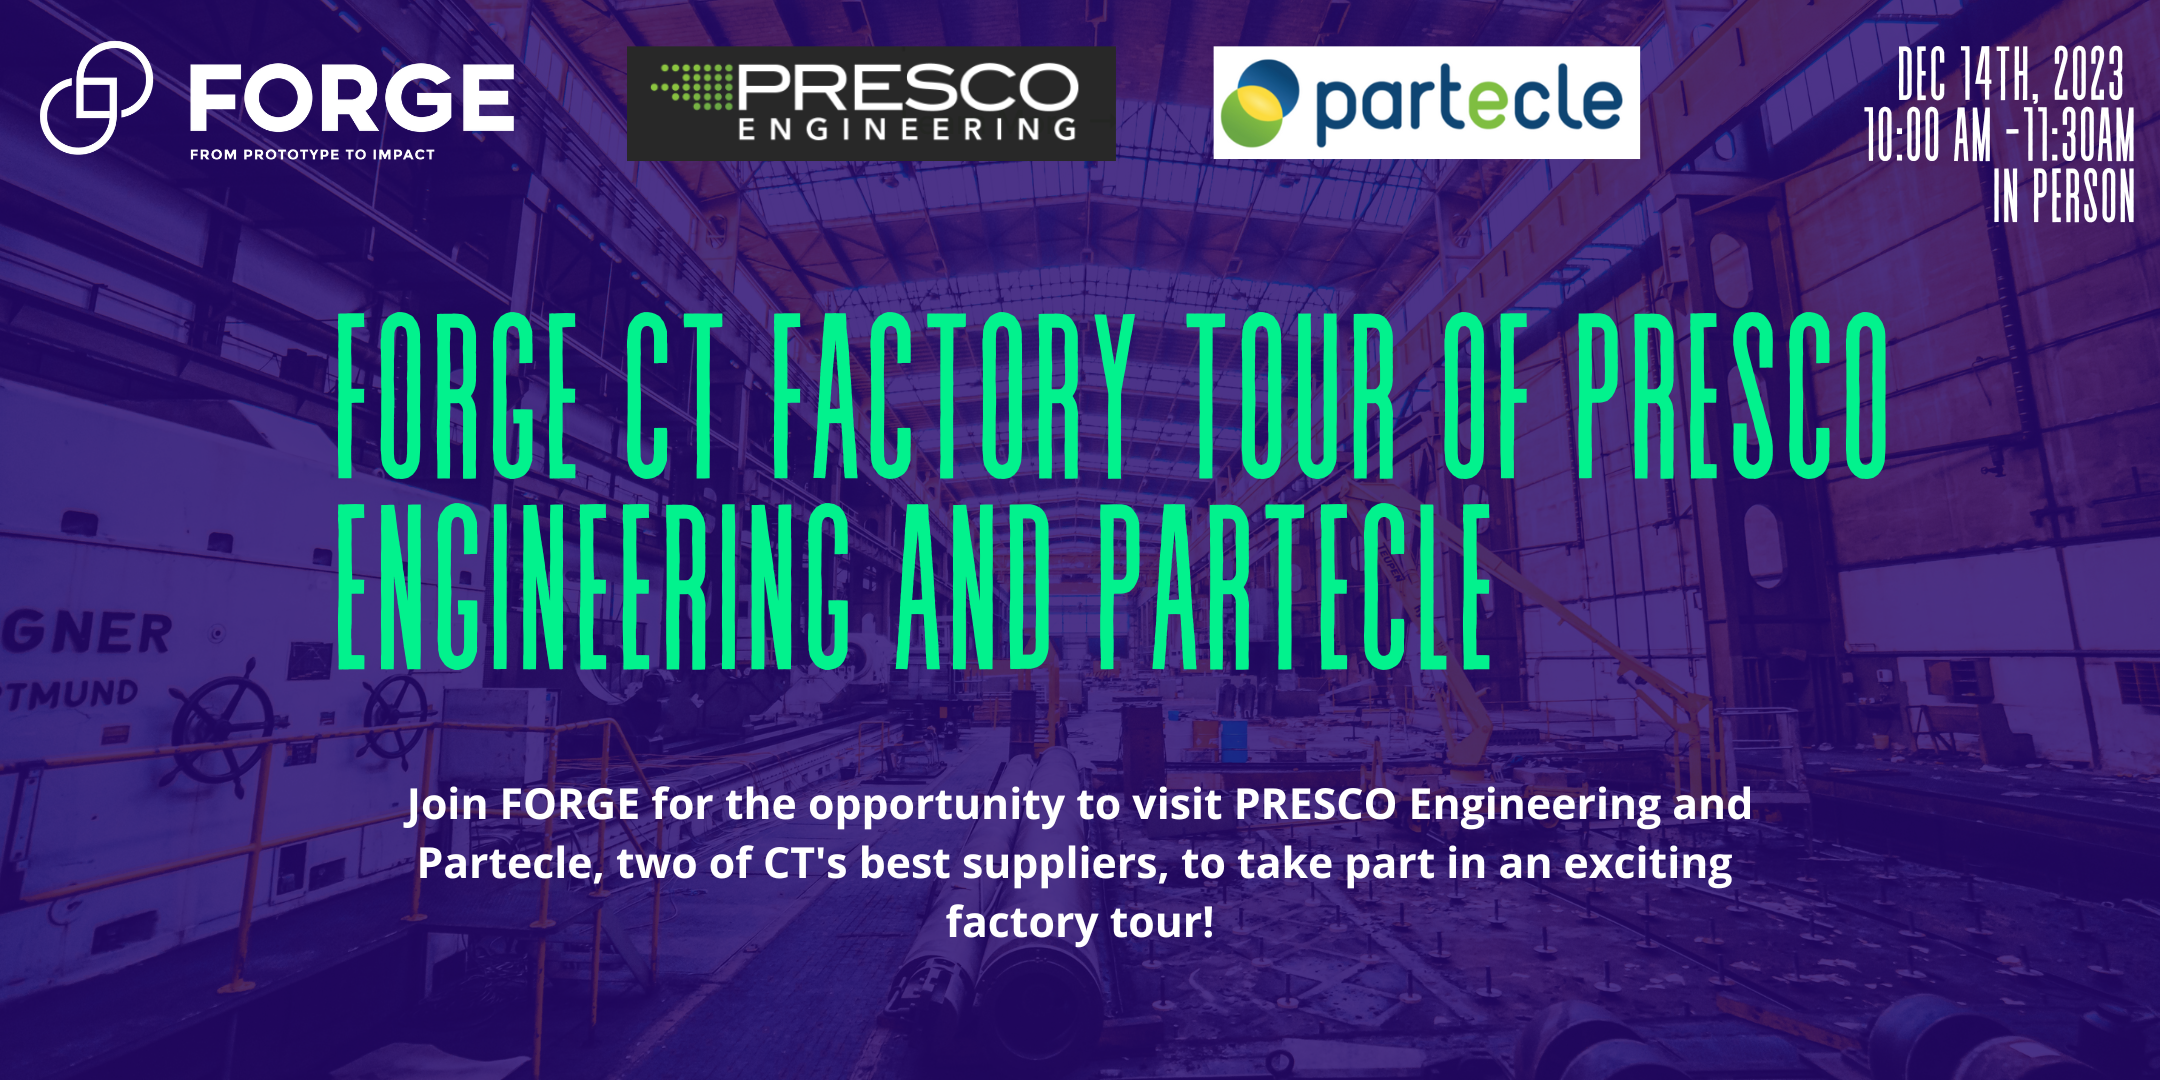 FORGE CT Factory Tour of PRESCO Engineering and Partecle